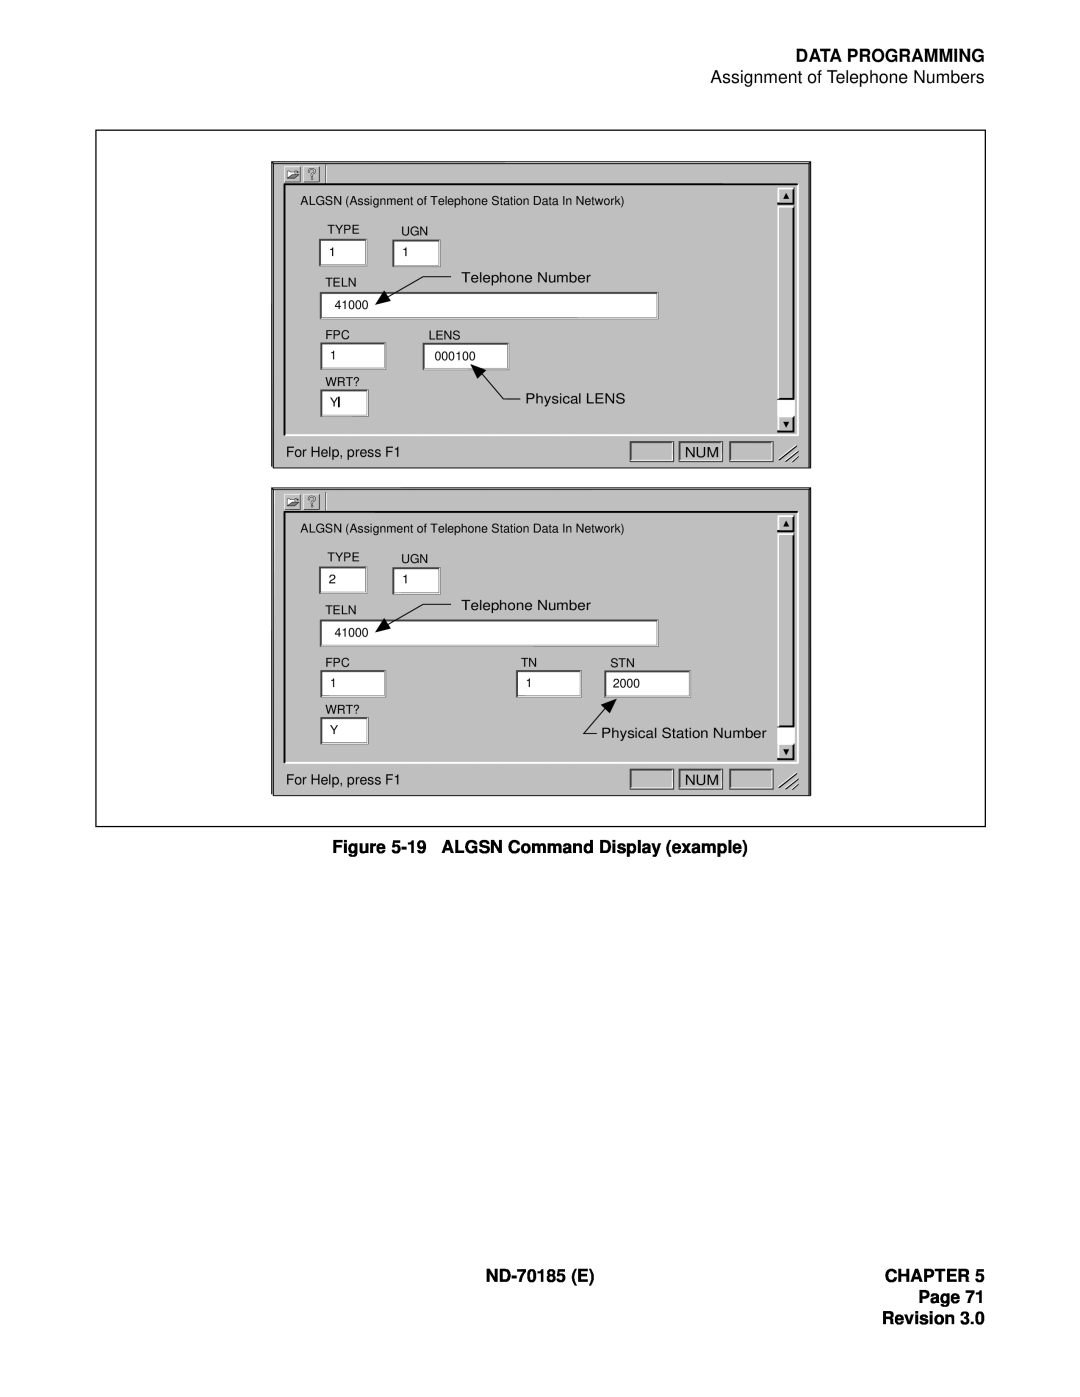 NEC NEAX2400 Data Programming, 19ALGSN Command Display example, ND-70185ECHAPTER Page Revision, Telephone Number 